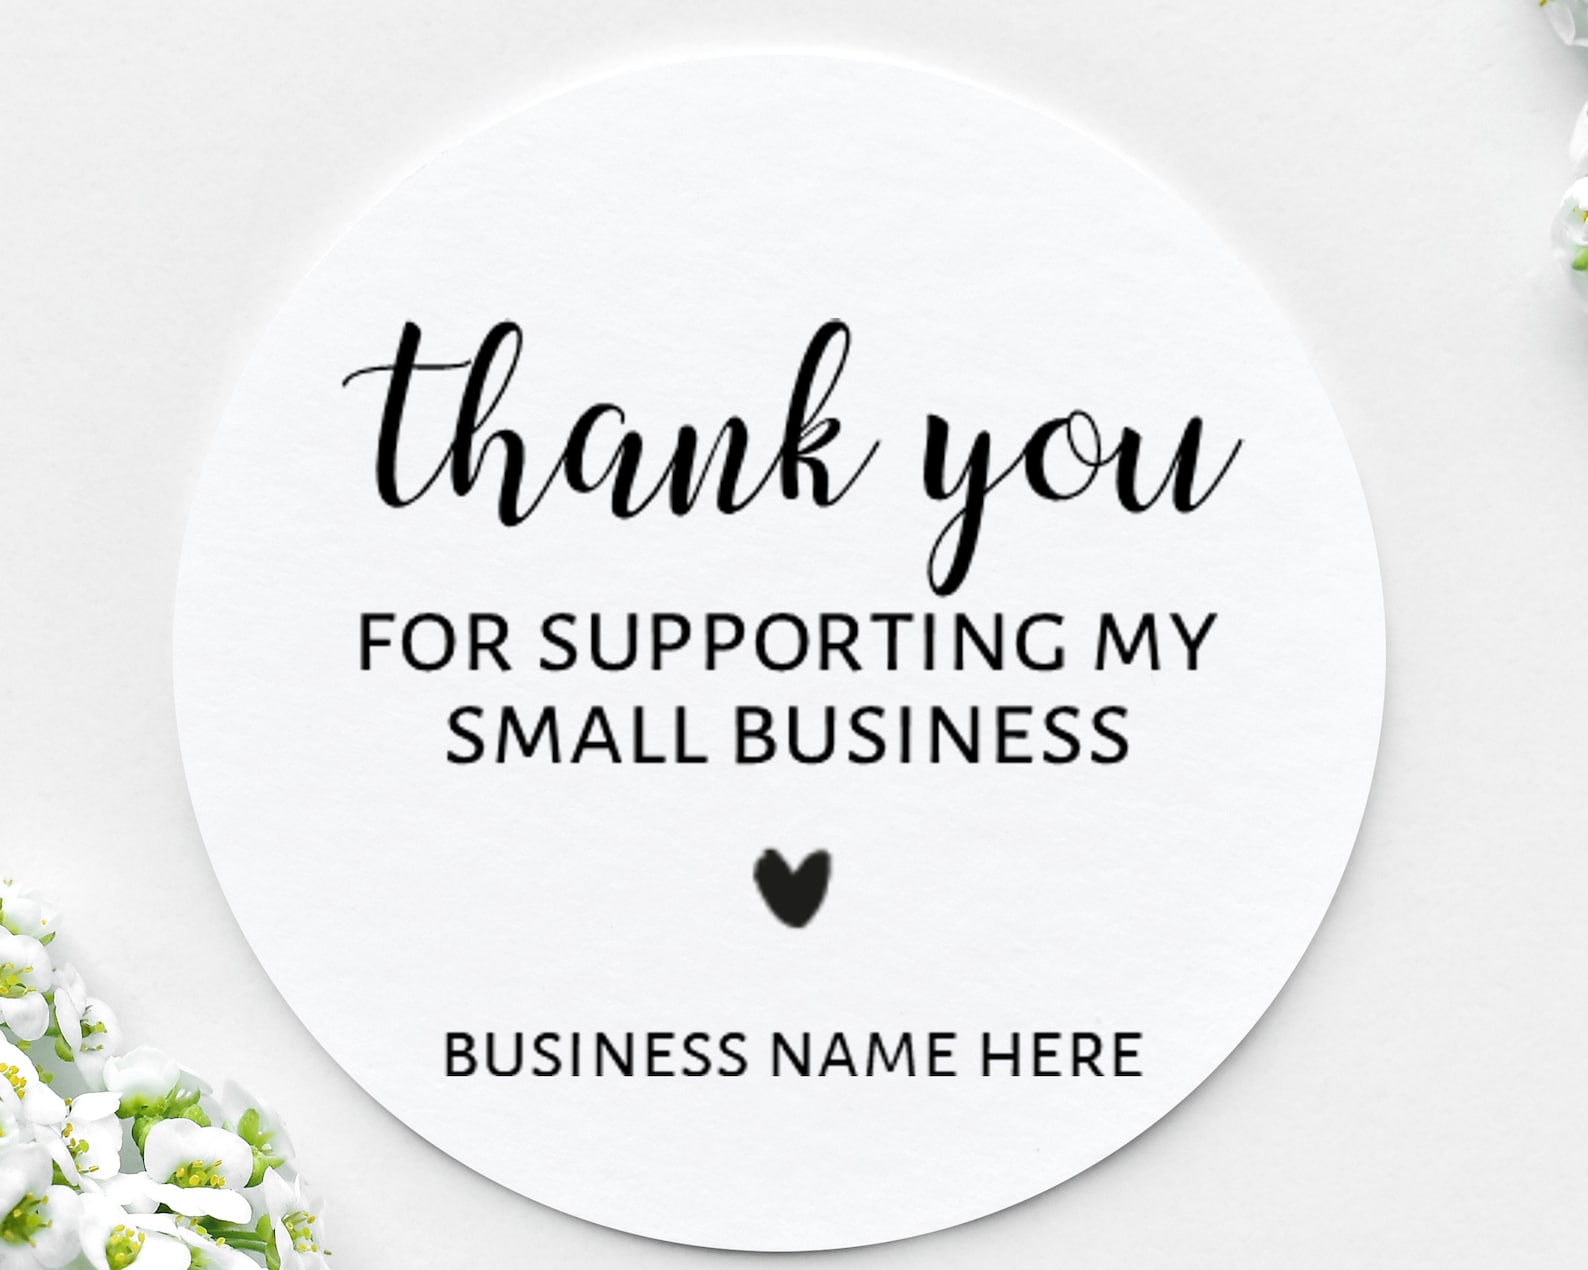 My small shop. Thank you for supporting small Business. Thank you for supporting my small Business. Thank you for support my small Business. Логотип thank you for supporting my small Business.